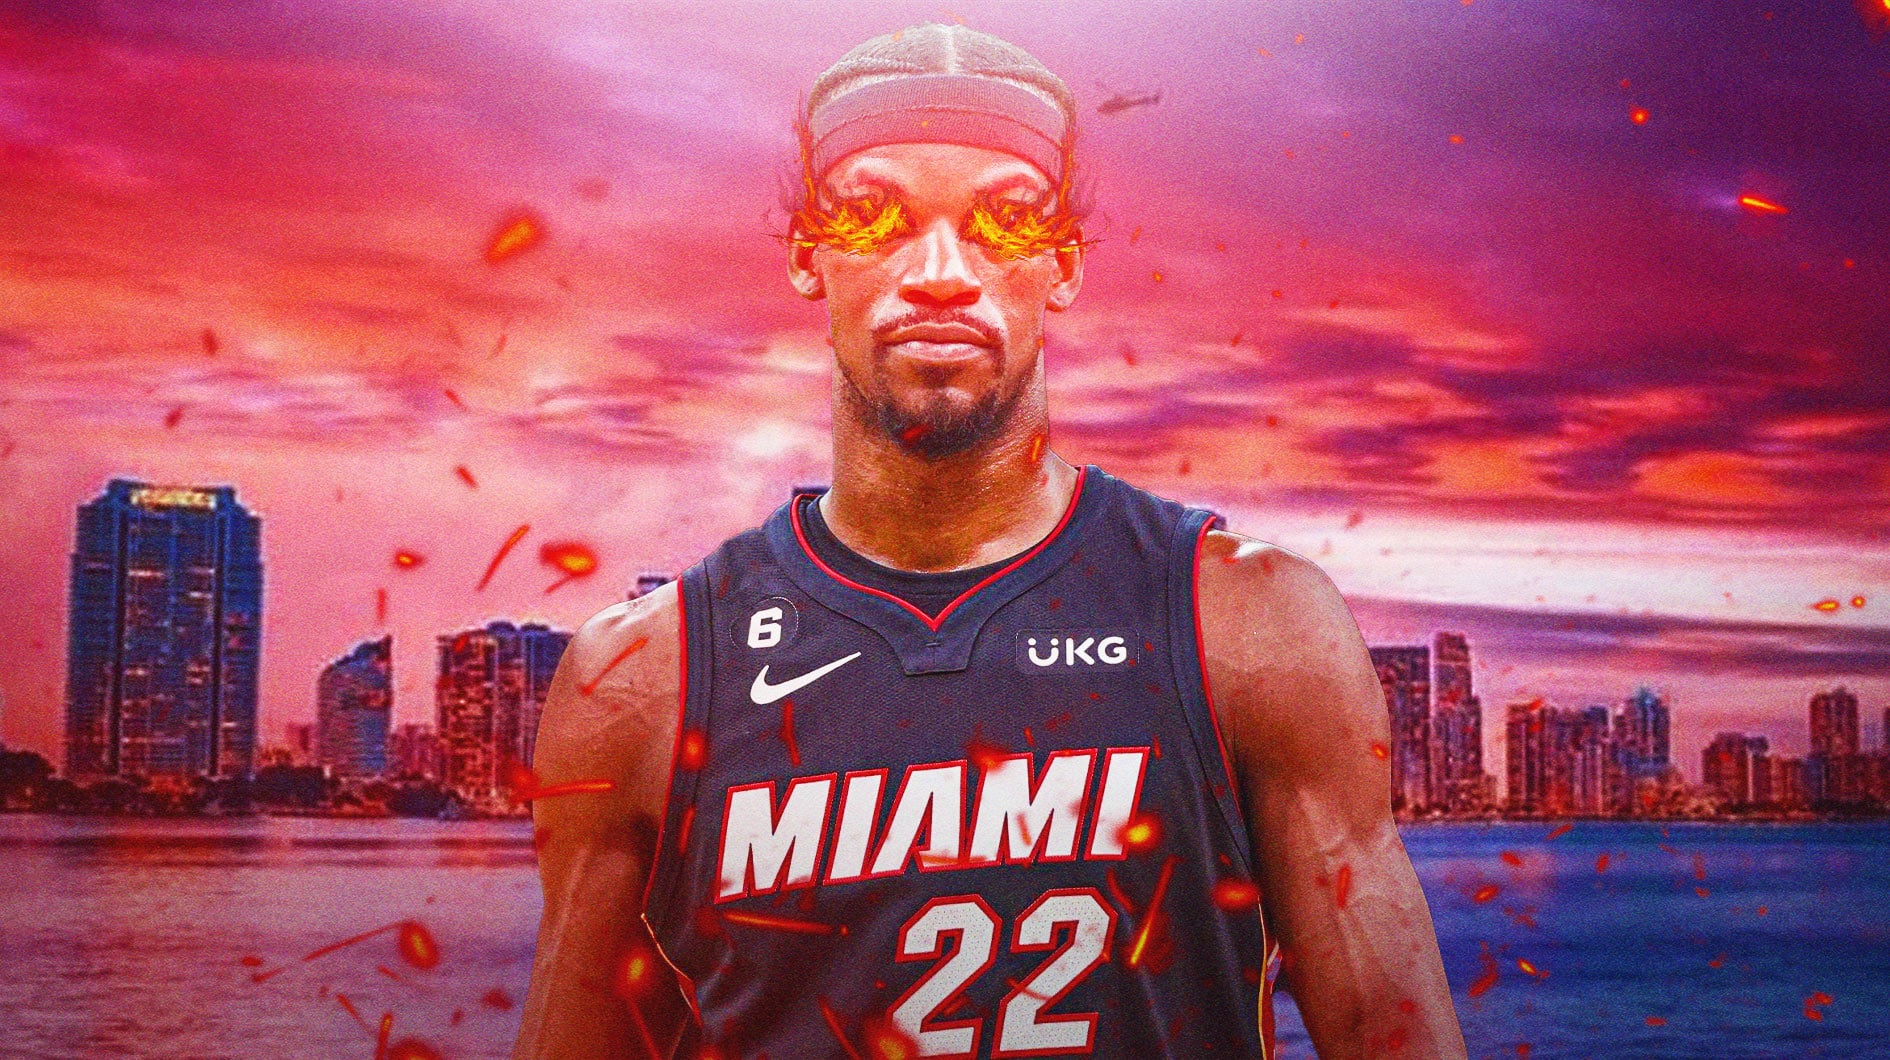 Miami Heat star Jimmy Butler with fire in his eyes in front of the city of Miami.